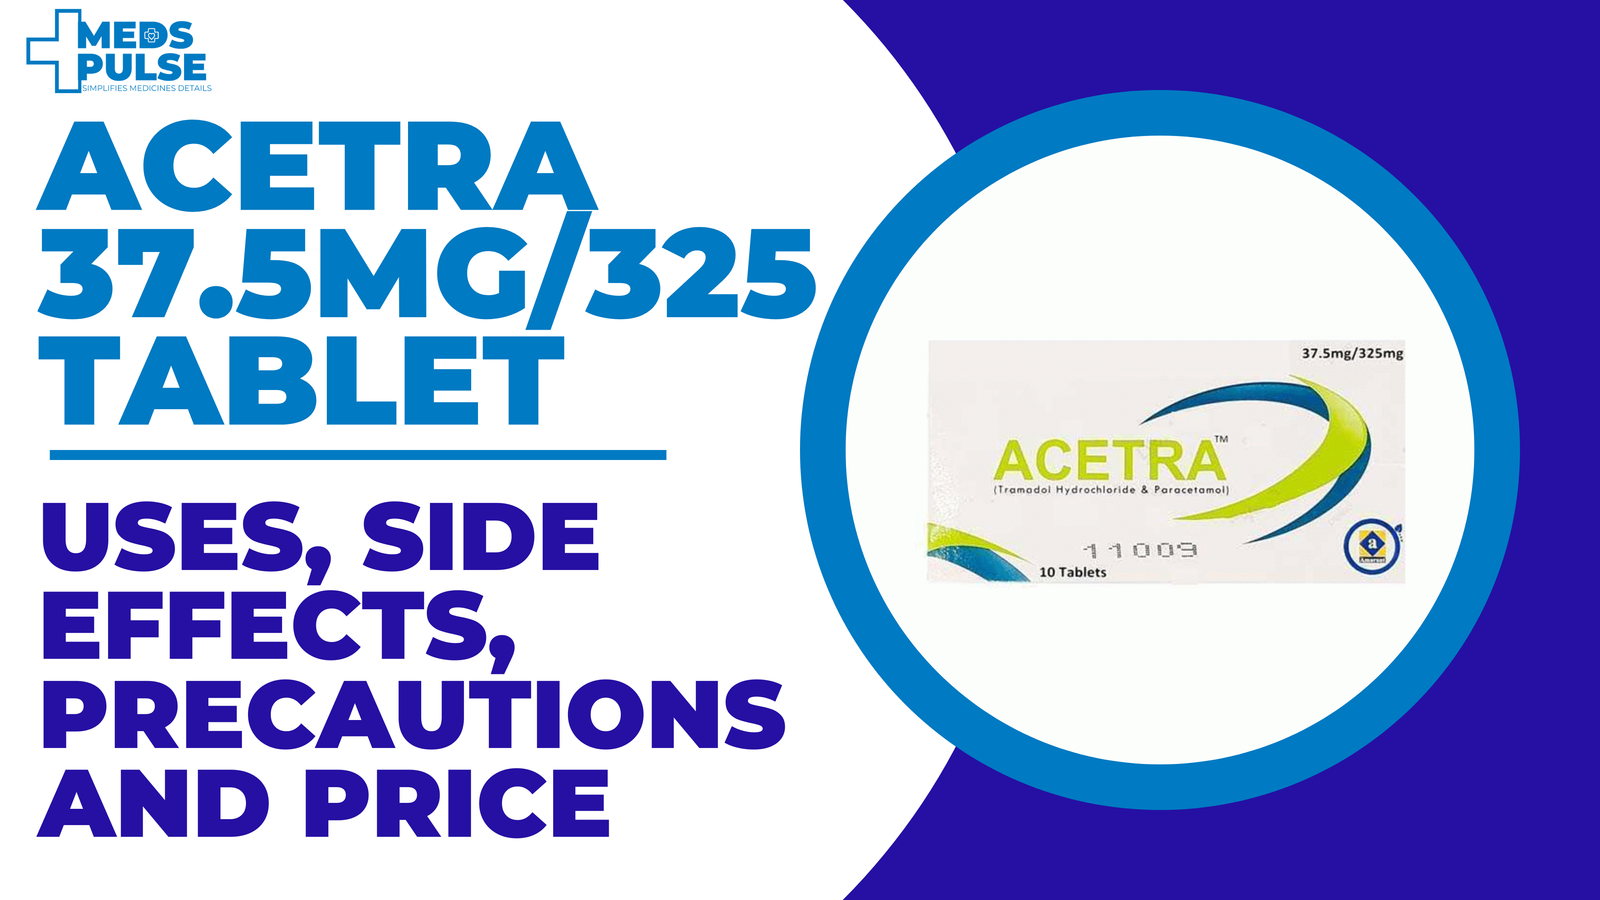 Acetra 37.5mg/325mg Tablet